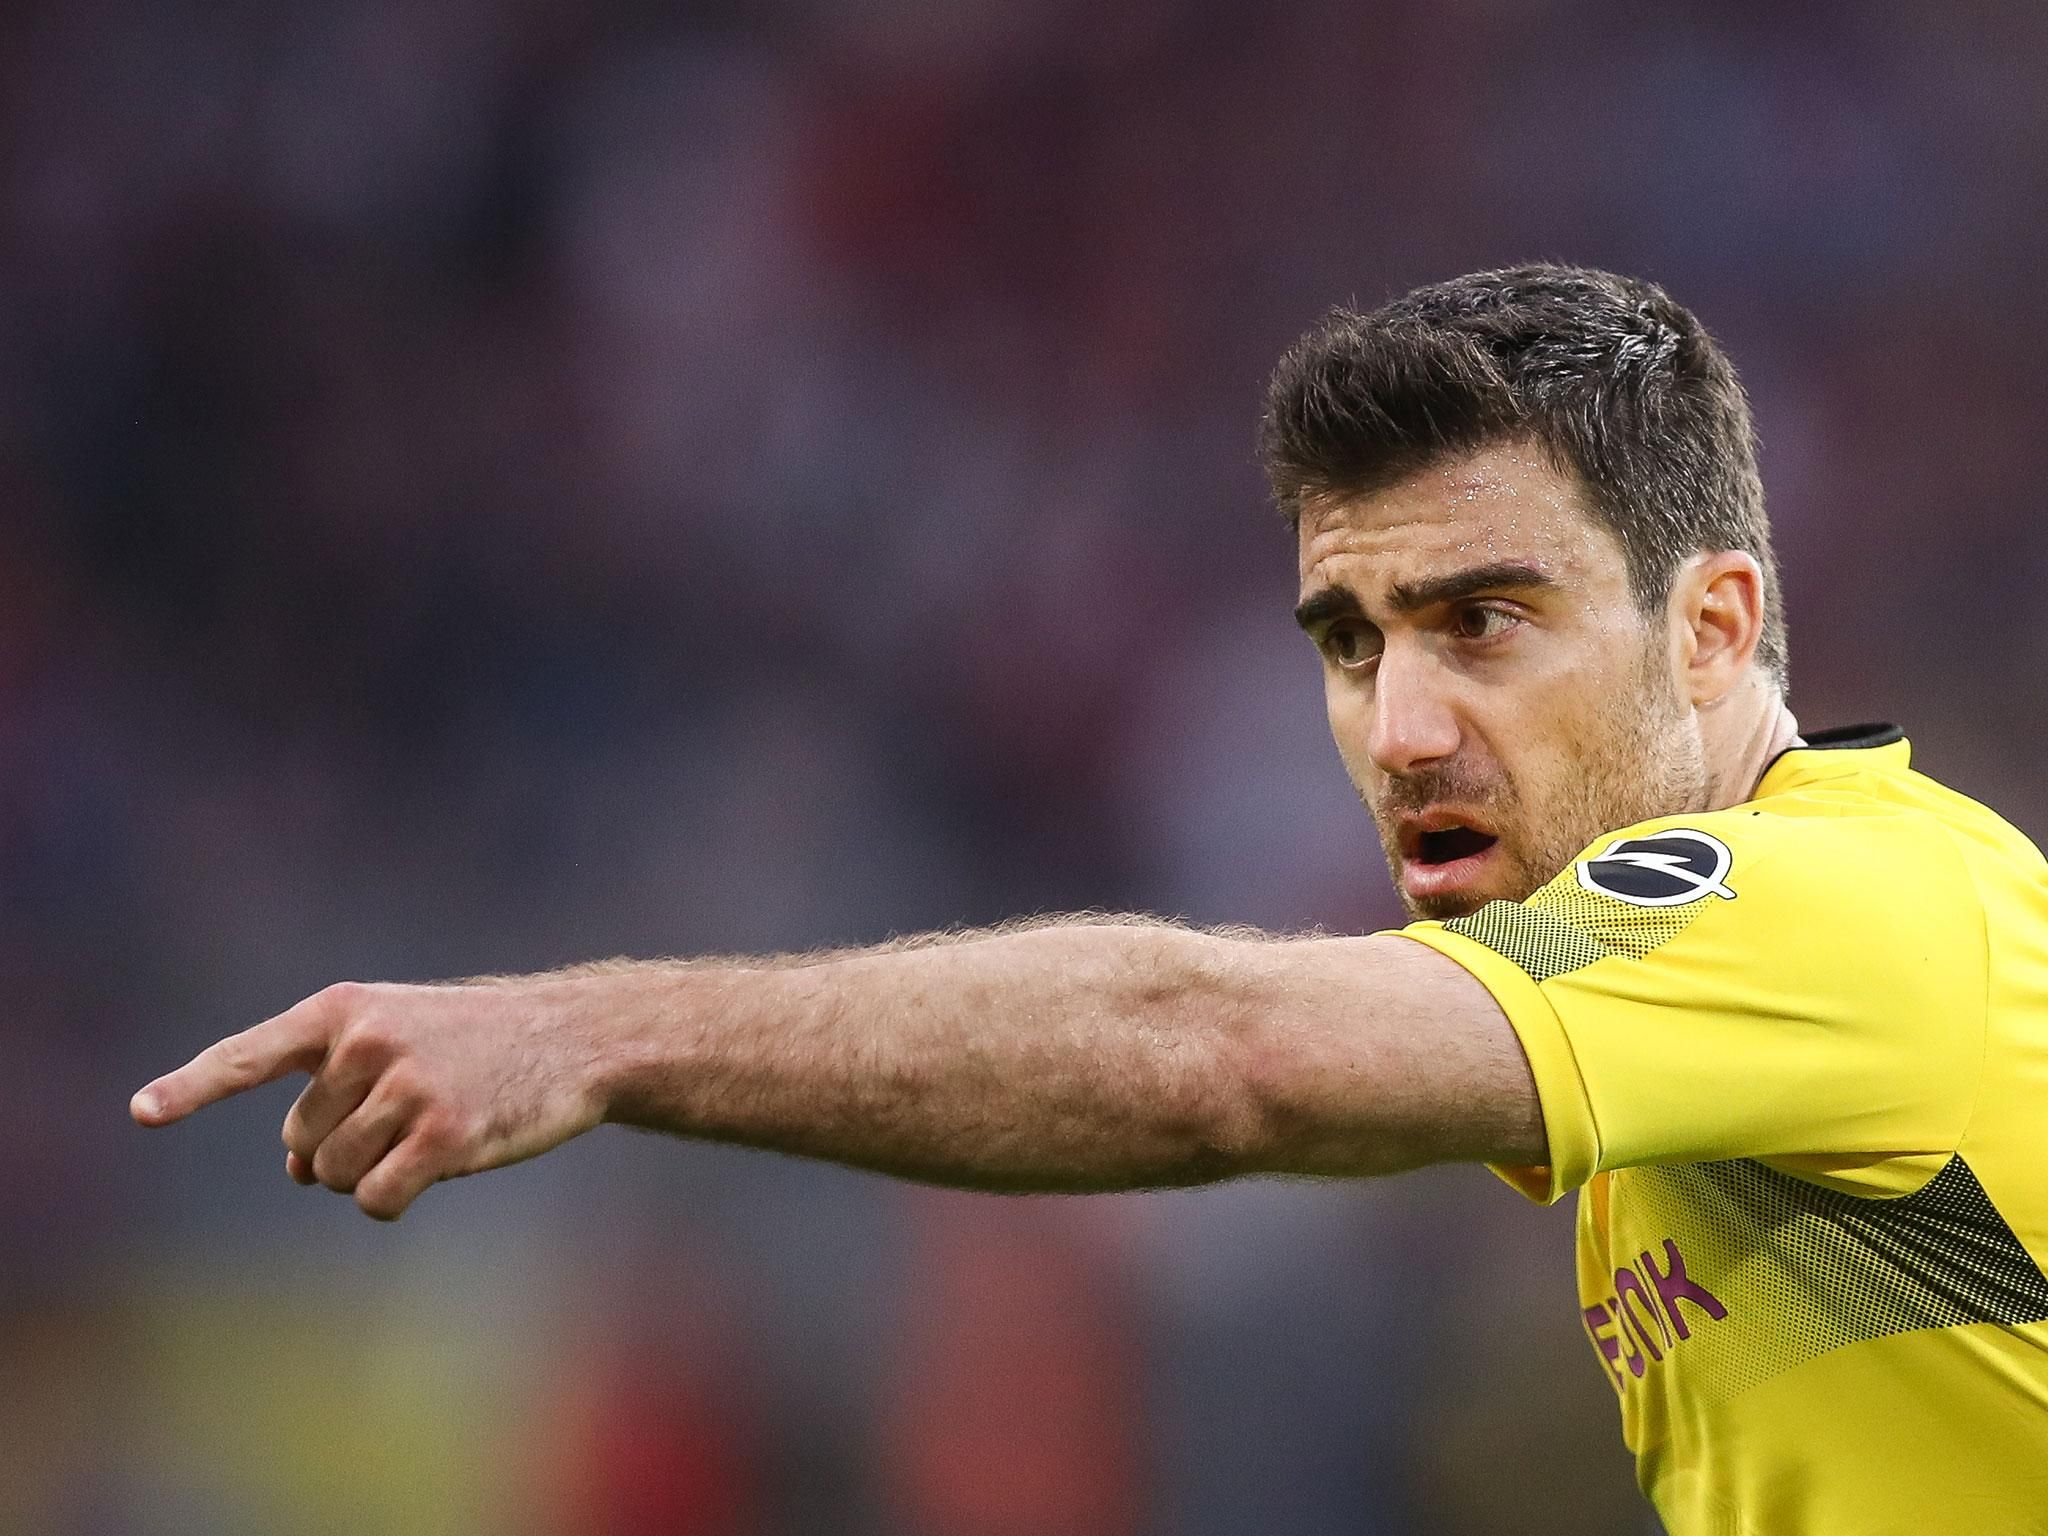 Arsenal targeting Sokratis Papastathopoulos as part of new back five this summer in overhaul of Arsene Wenger's squad